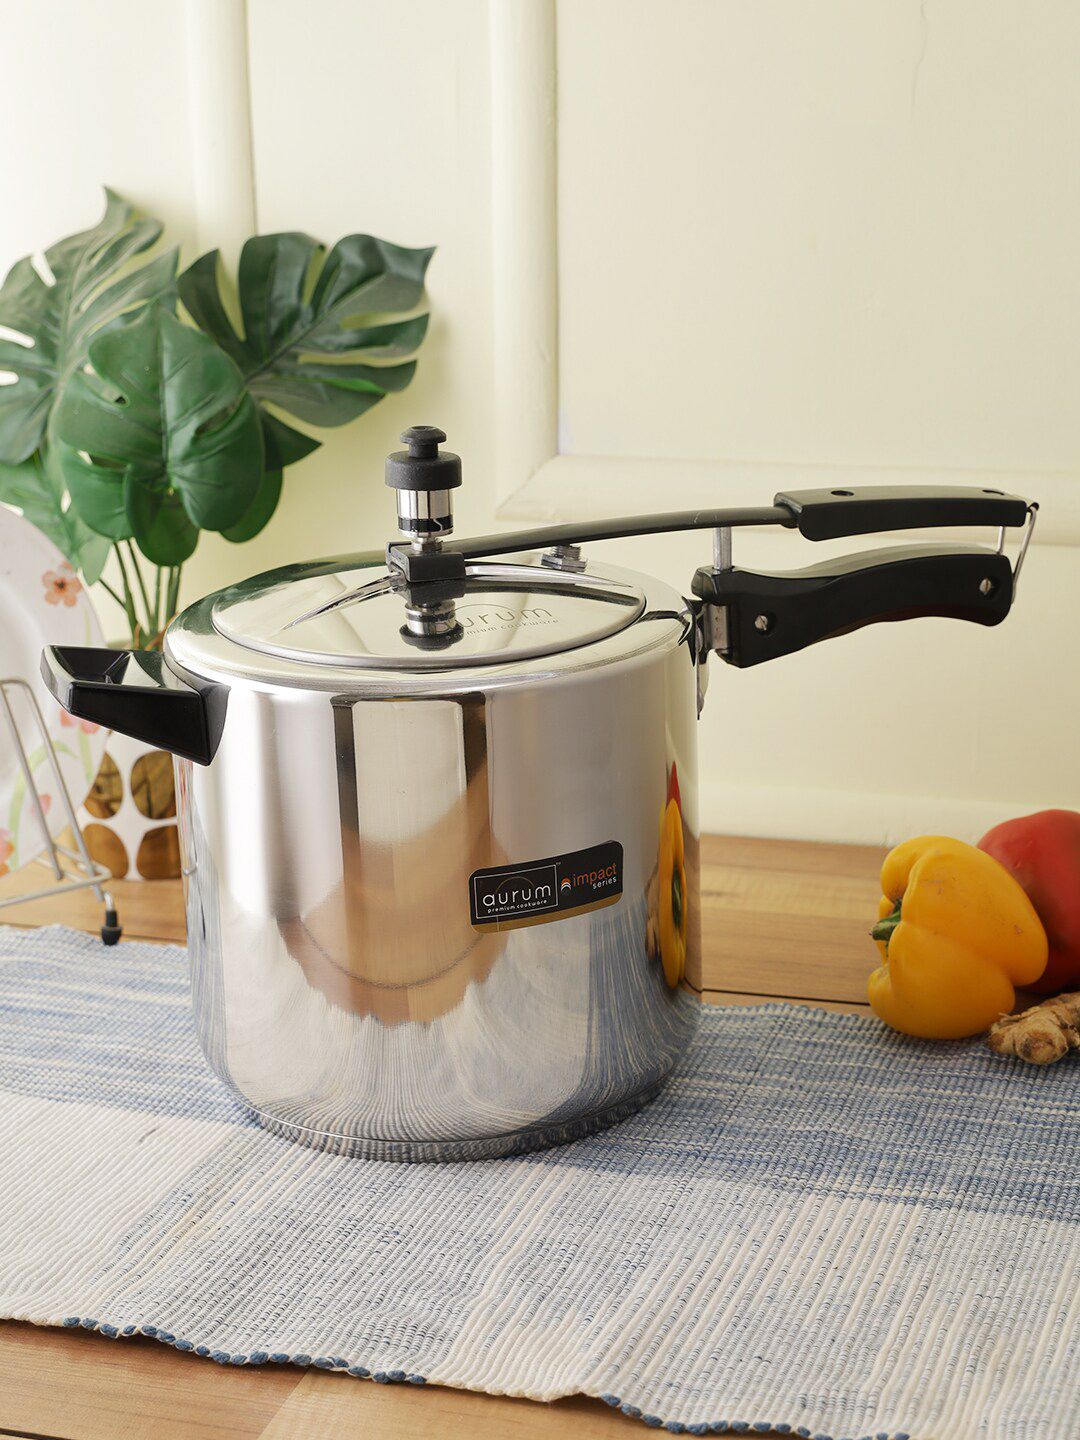 AURUM Silver-Toned Induction Bottom Pressure Cooker Price in India